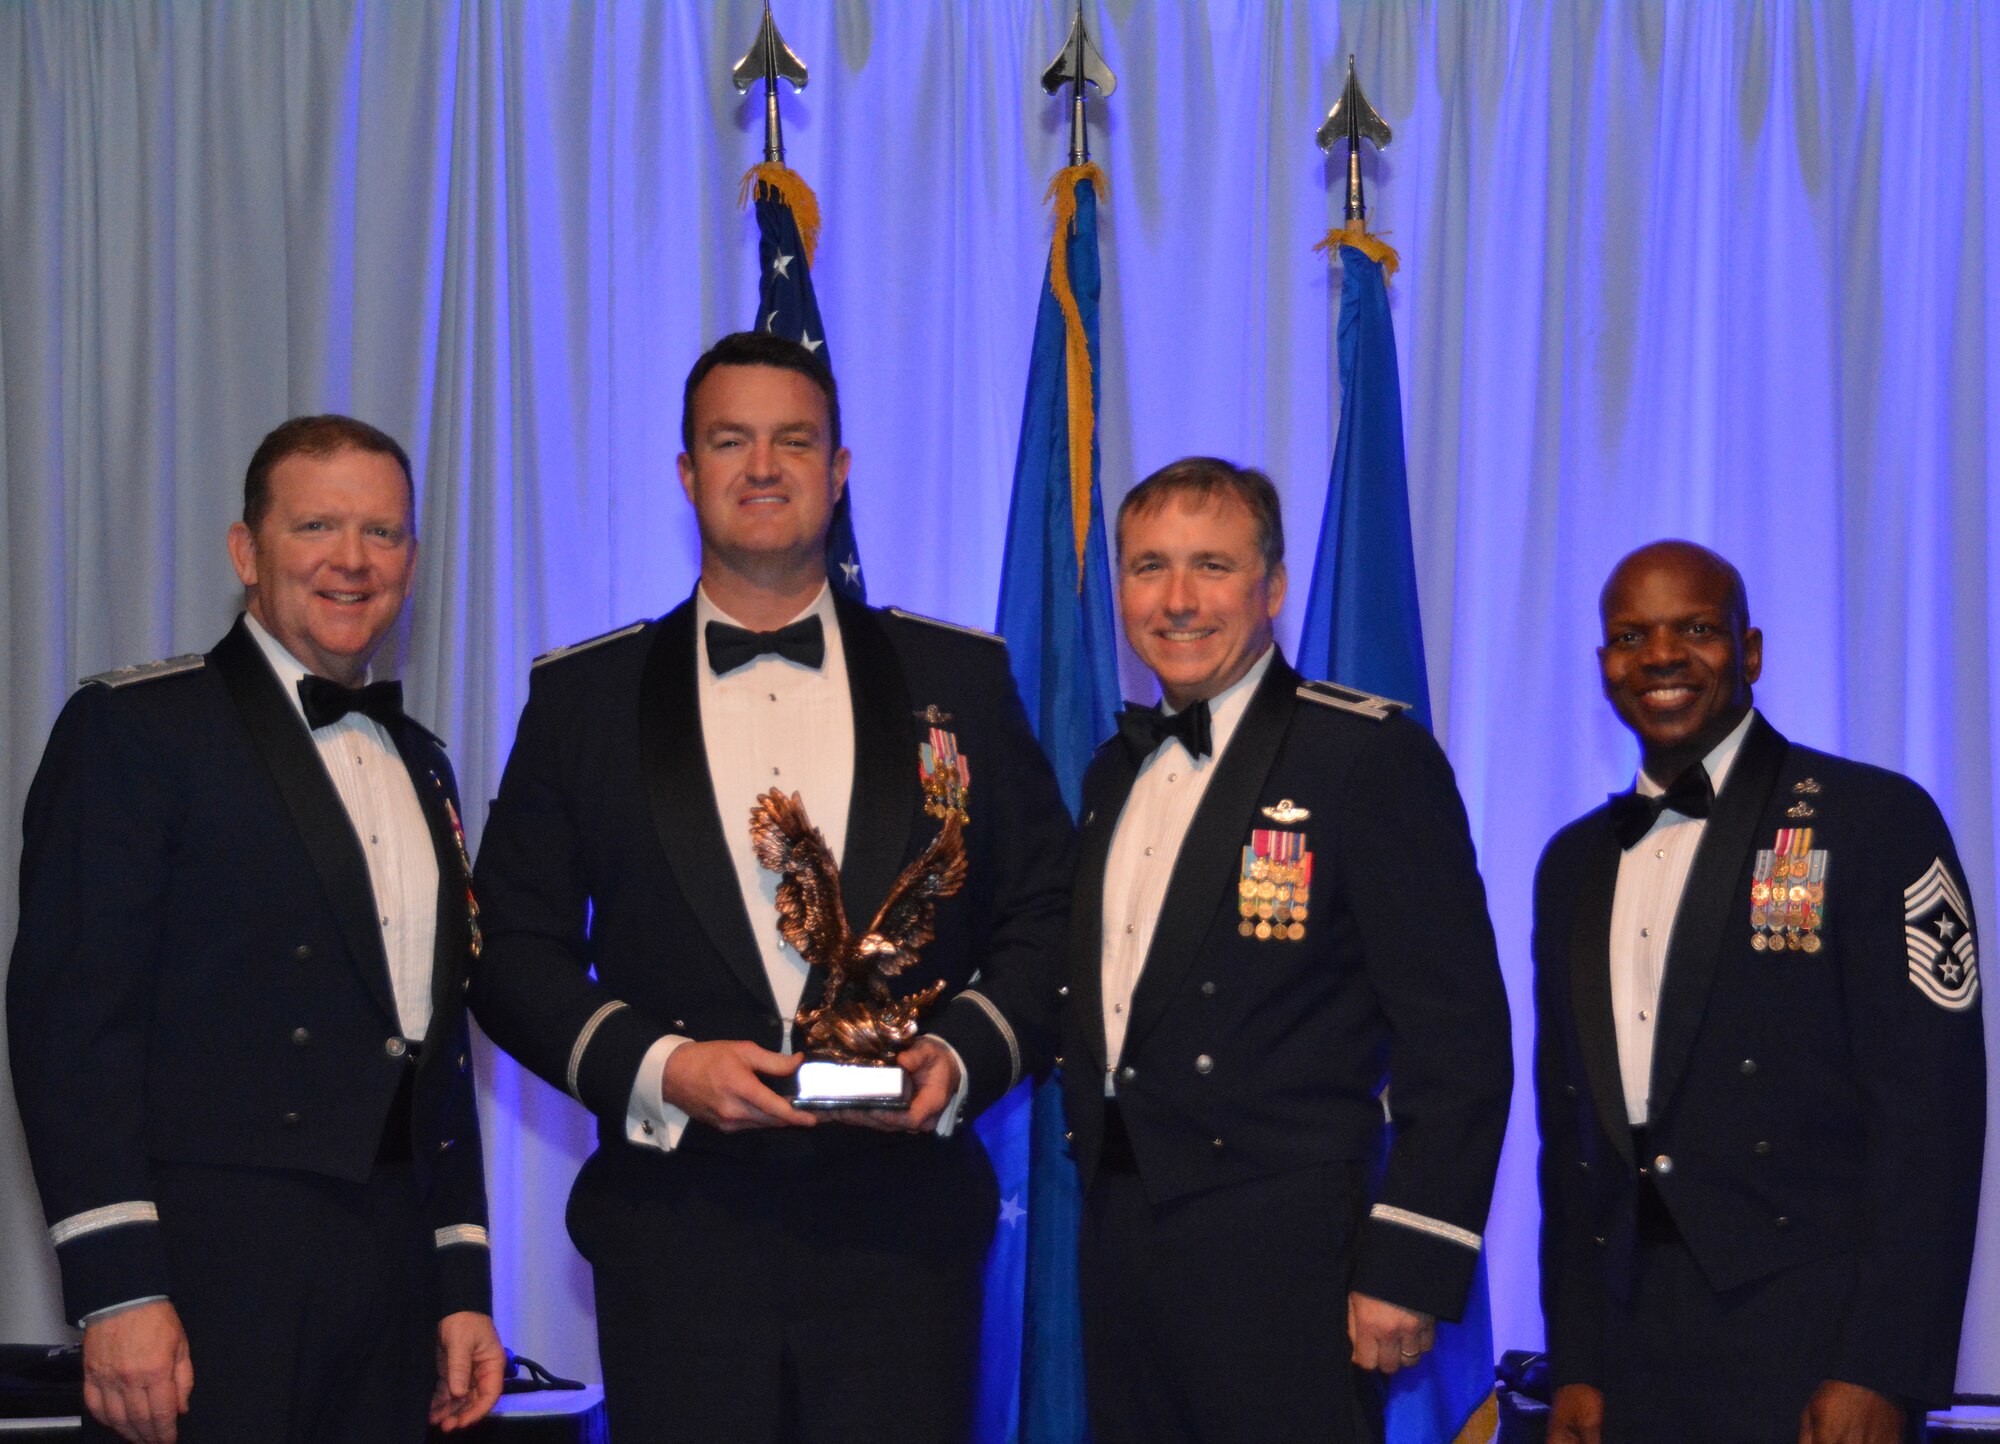 NAVAL AIR STATION FORT WORTH JOINT RESERVE BASE, Texas – Lt. Col. Bryan Dick, 44th Fighter Group, Tyndall Air Force Base, Fla., a geographically-separated unit, accepts the 2015 Field Grade Officer of the Year award from Col. John Breazeale, 301st Fighter Wing commander, Feb. 20 at the Fort Worth Stockyards, Texas. Thirty-four nominees competed in 10 categories for recognition and winners will compete at the major command level. (U.S. Air Force photo by Staff Sgt. Samantha Mathison)